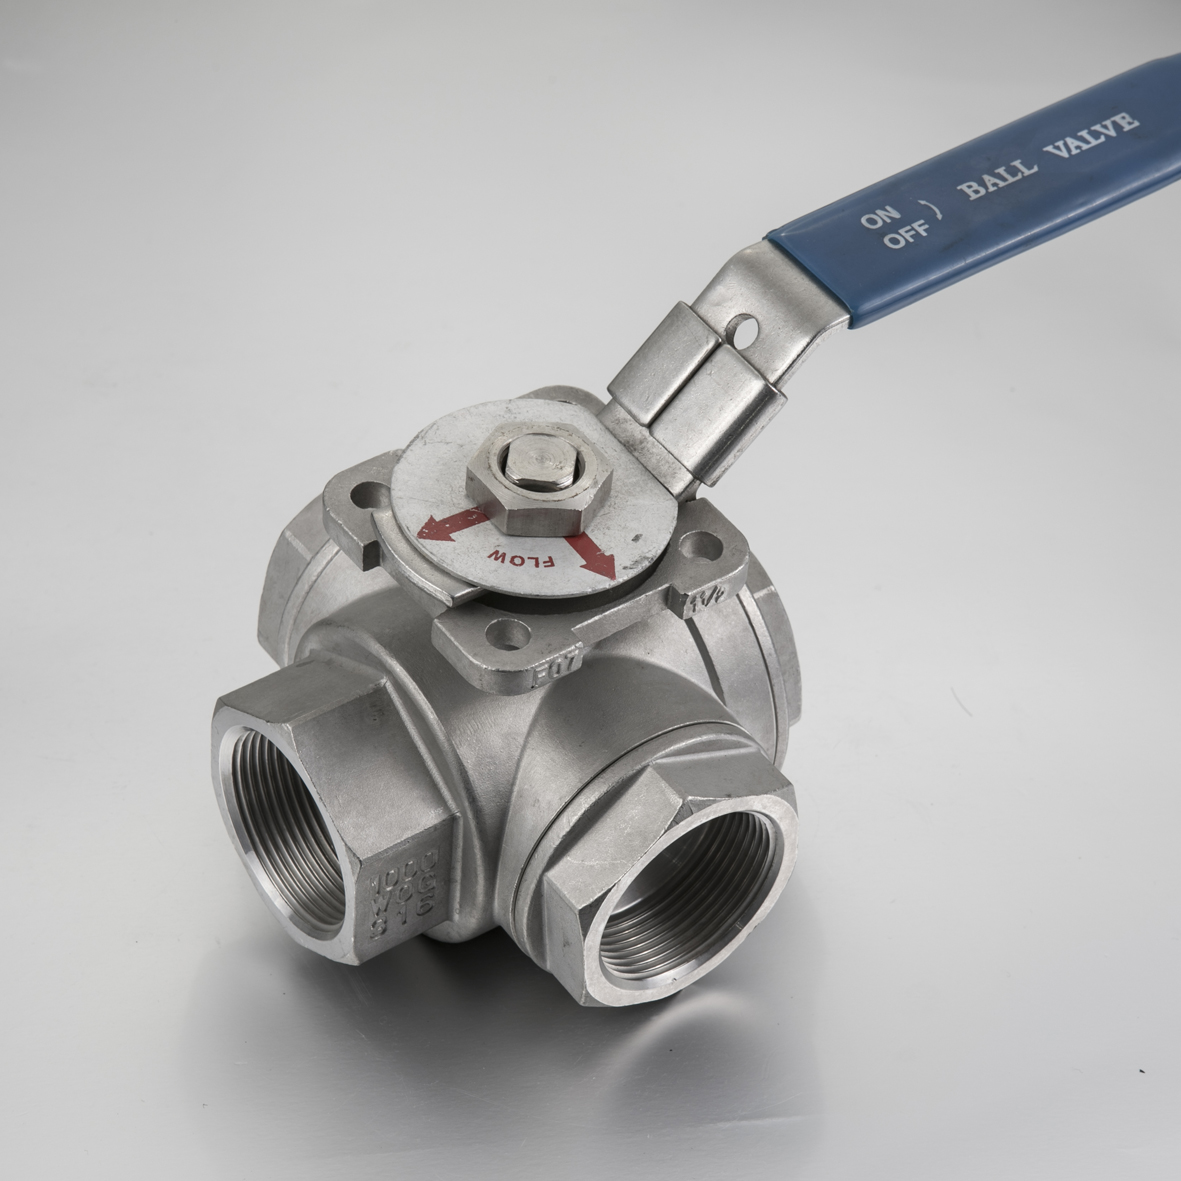 3-Way Stainless Steel 304/316 Ball Valve with Mounting Pad - Buy 3-Way